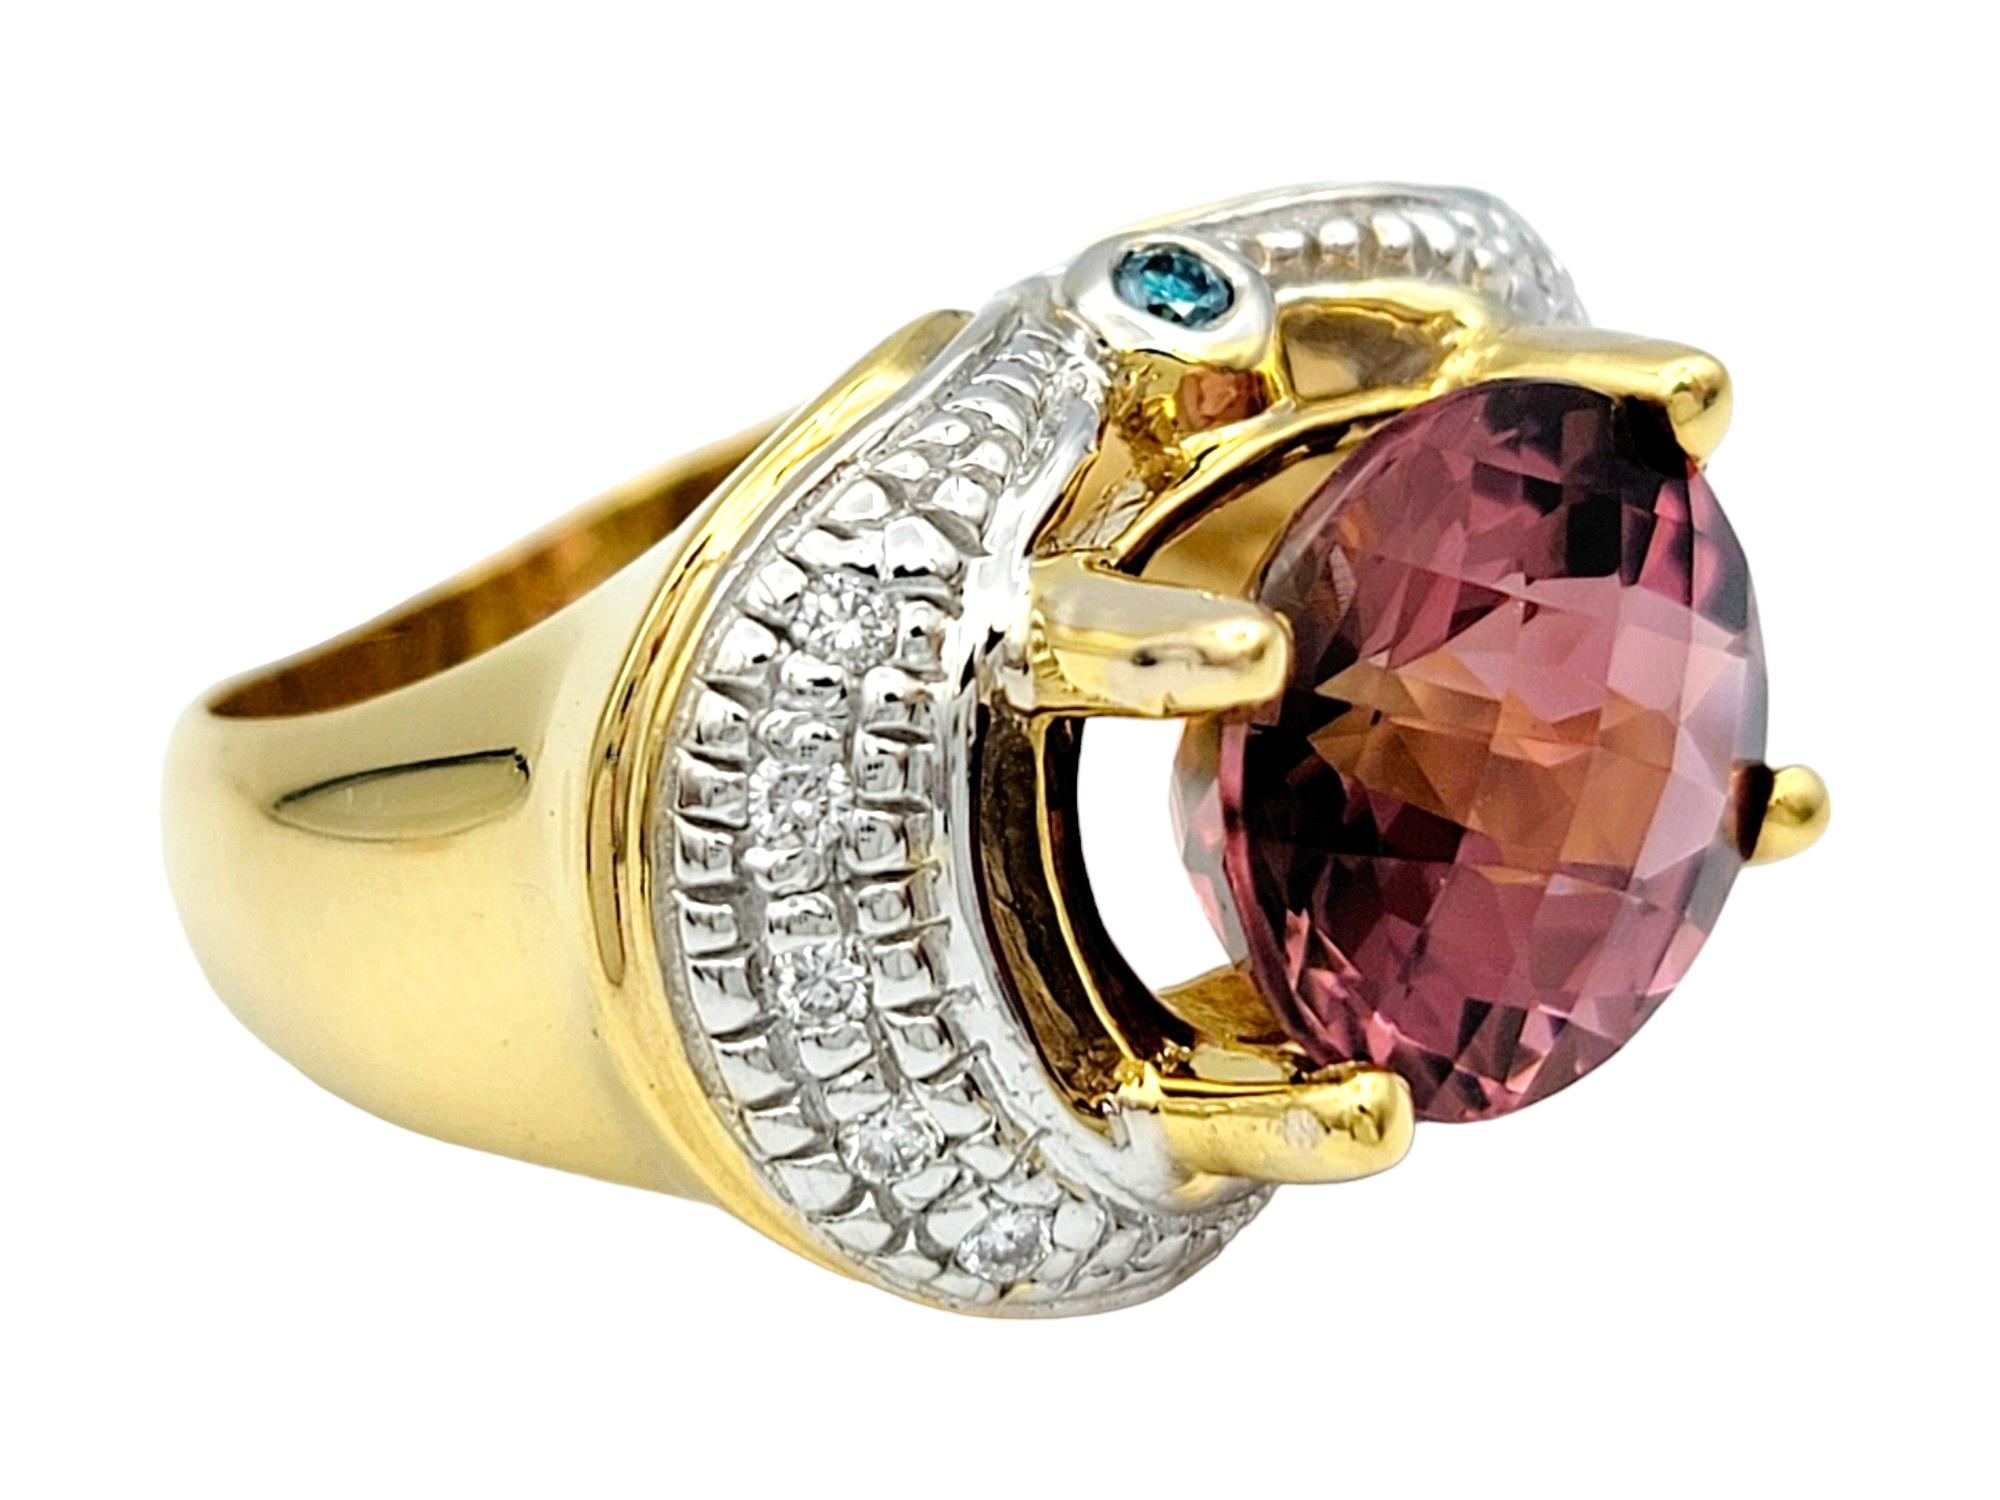 Oval Cut Oval Pink Tourmaline and Diamond Halo Ring Set in 14 Karat White and Yellow Gold For Sale